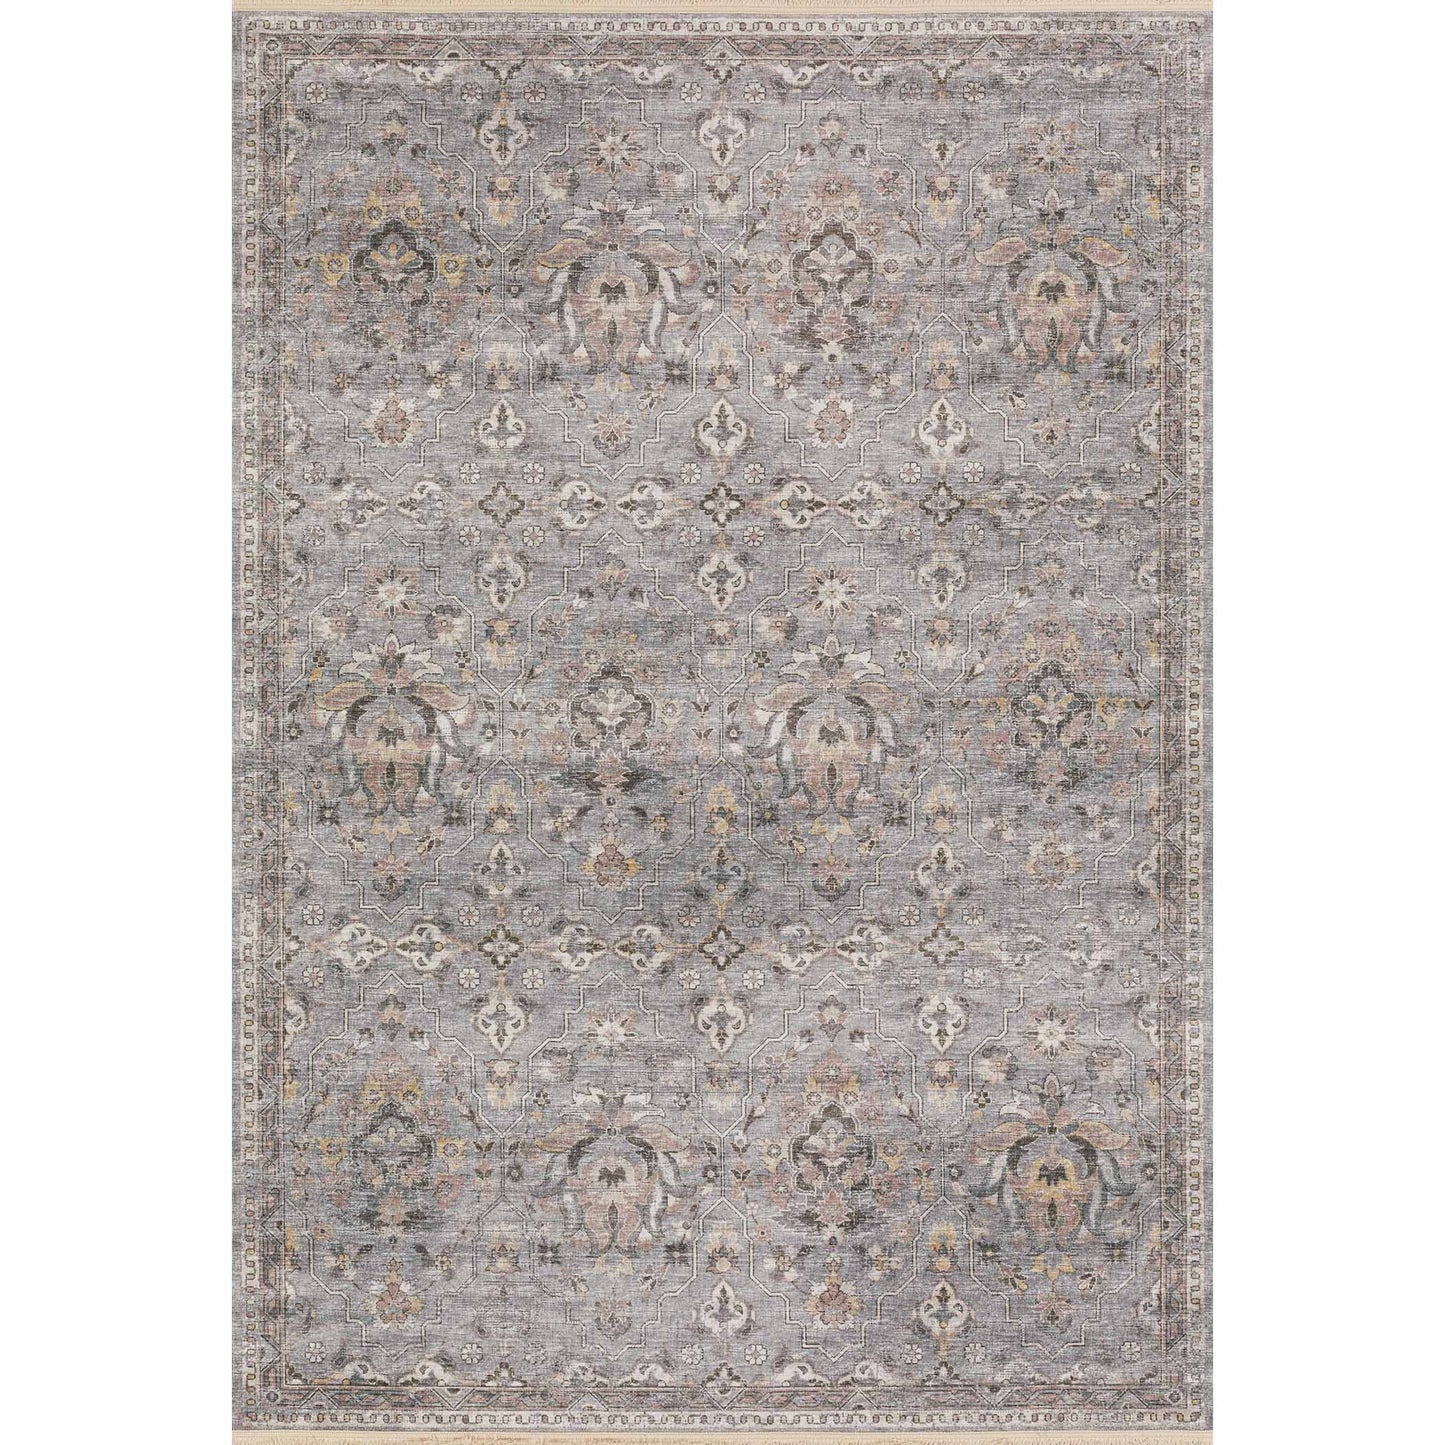 Dalyn Rugs Marbella MB4 Silver Traditional Machinemade Rug